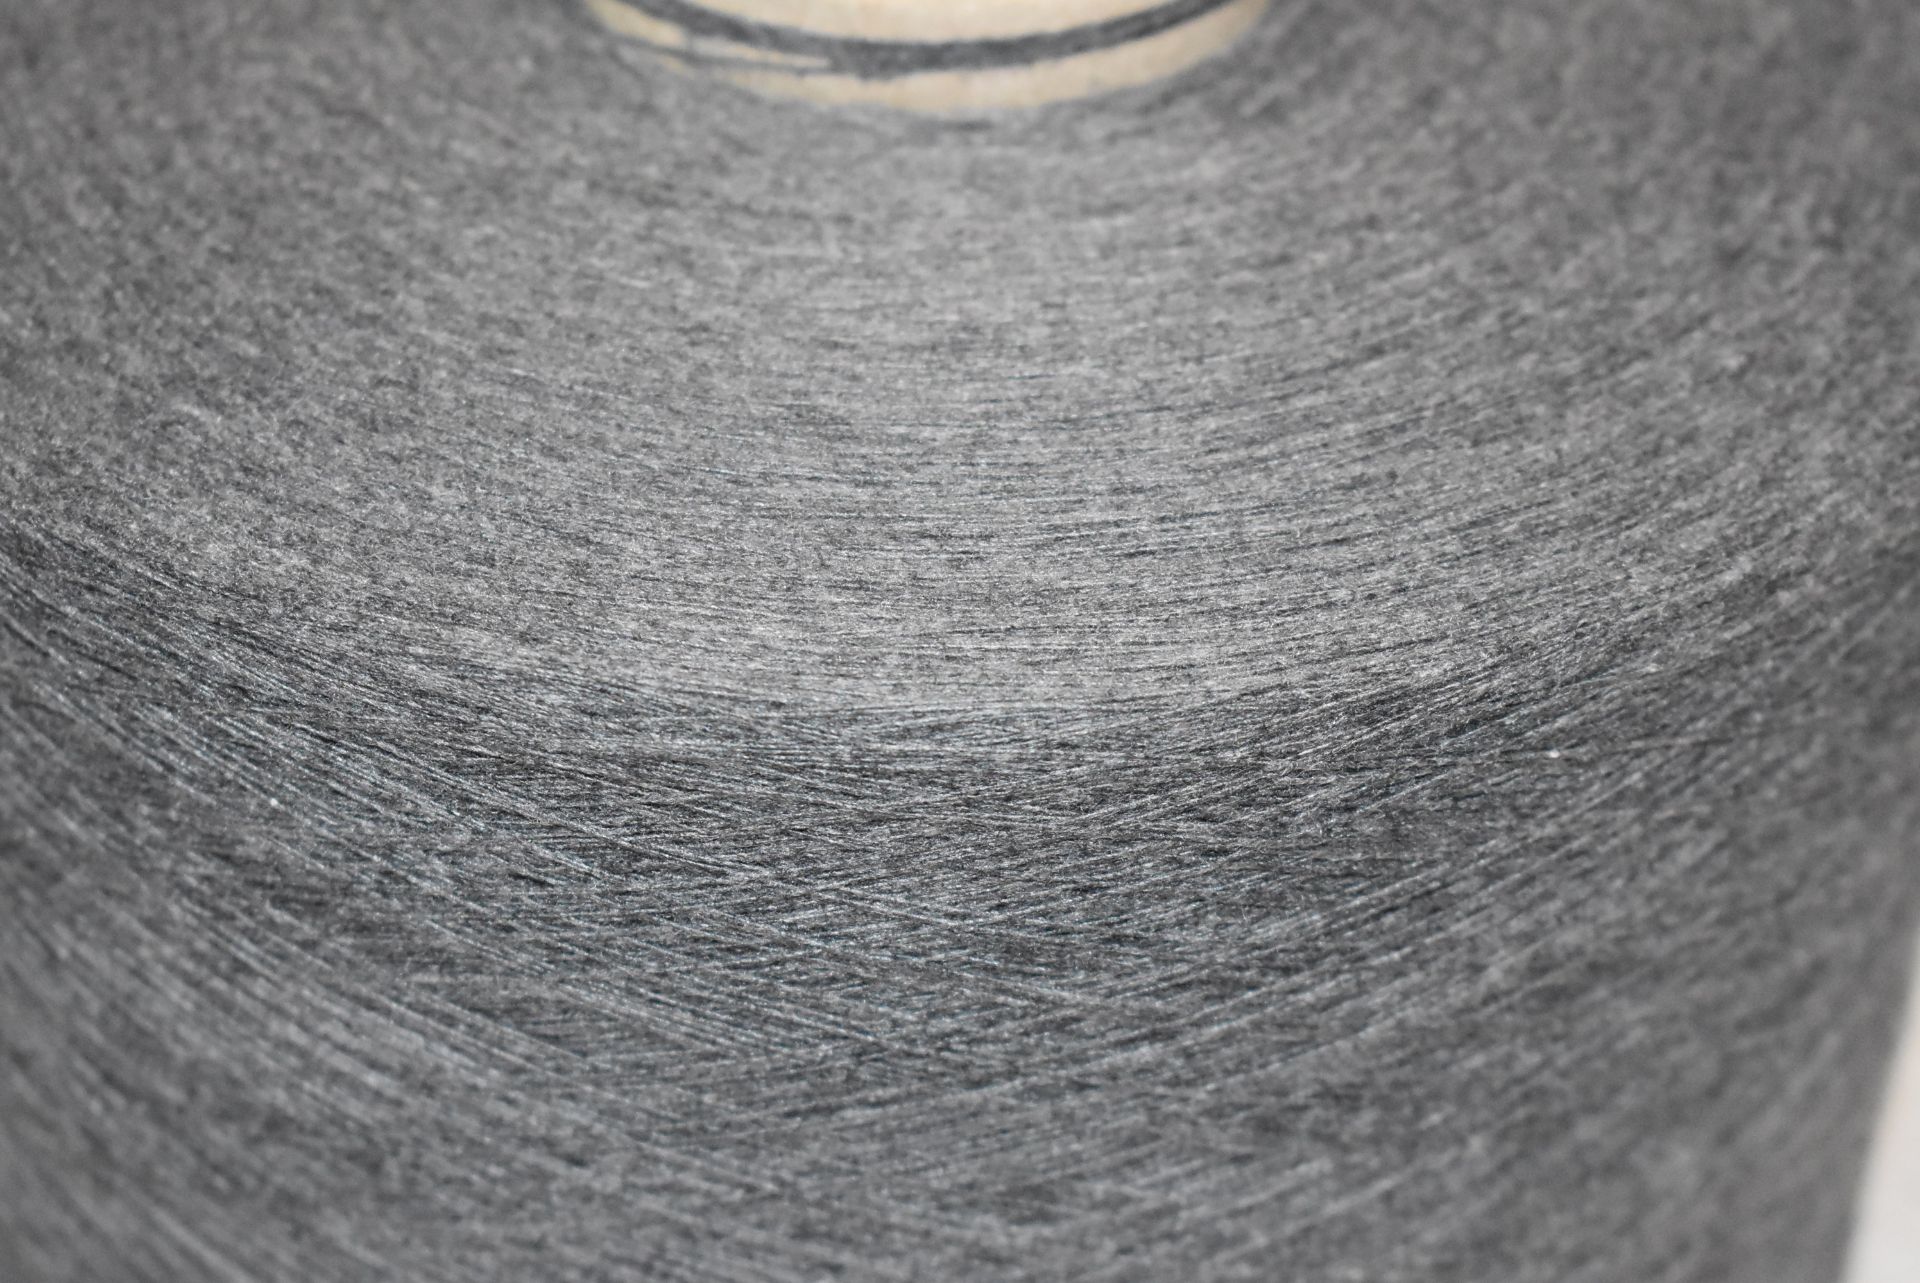 4 x Cones of 1/13 MicroCotton Knitting Yarn - Mid Grey - Approx Weight: 2,500g - New Stock ABL Yarn - Image 6 of 17